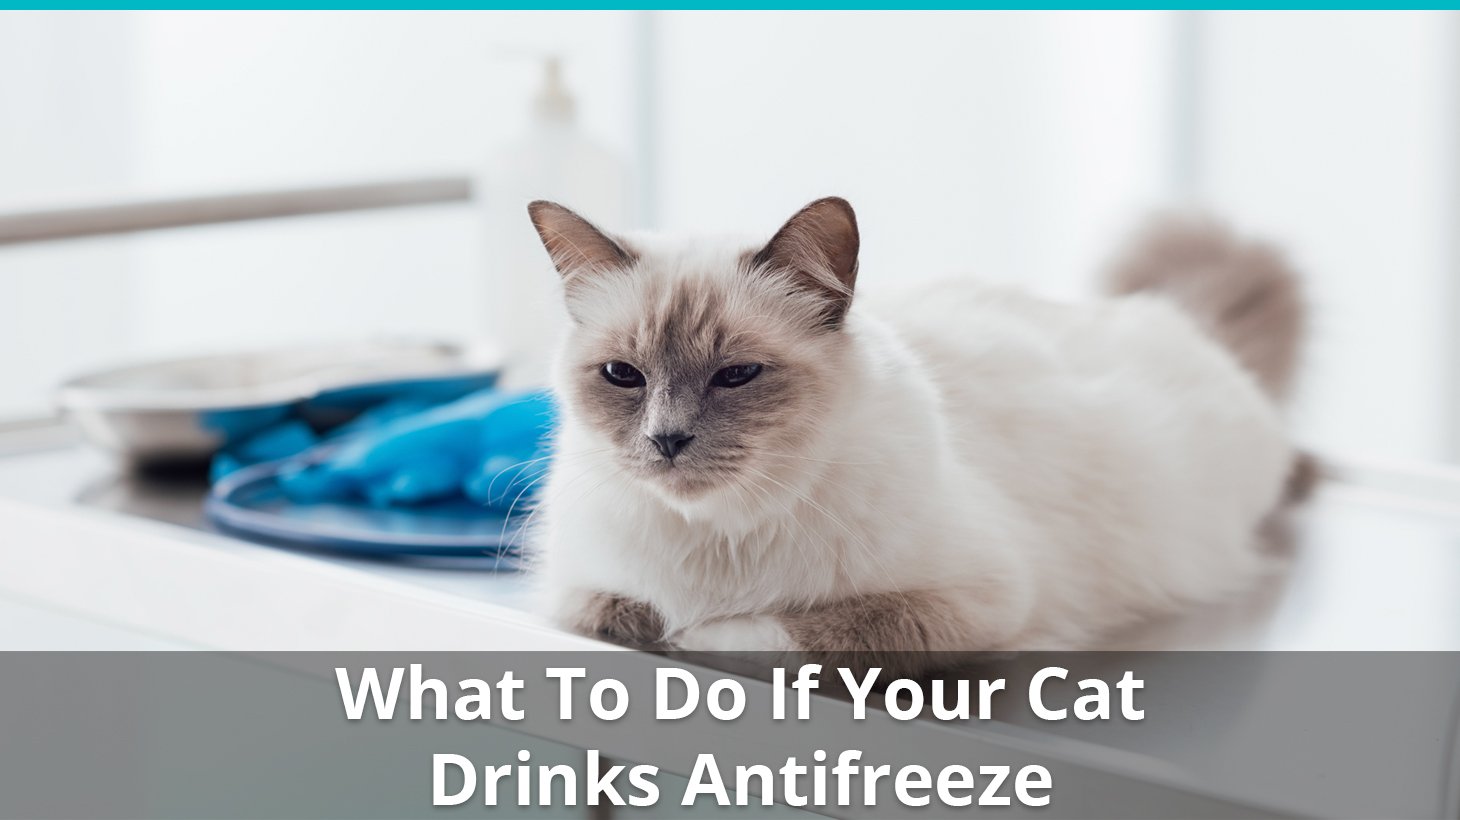 Will Cats Drink Antifreeze And Get Poisoned? What To Do ...